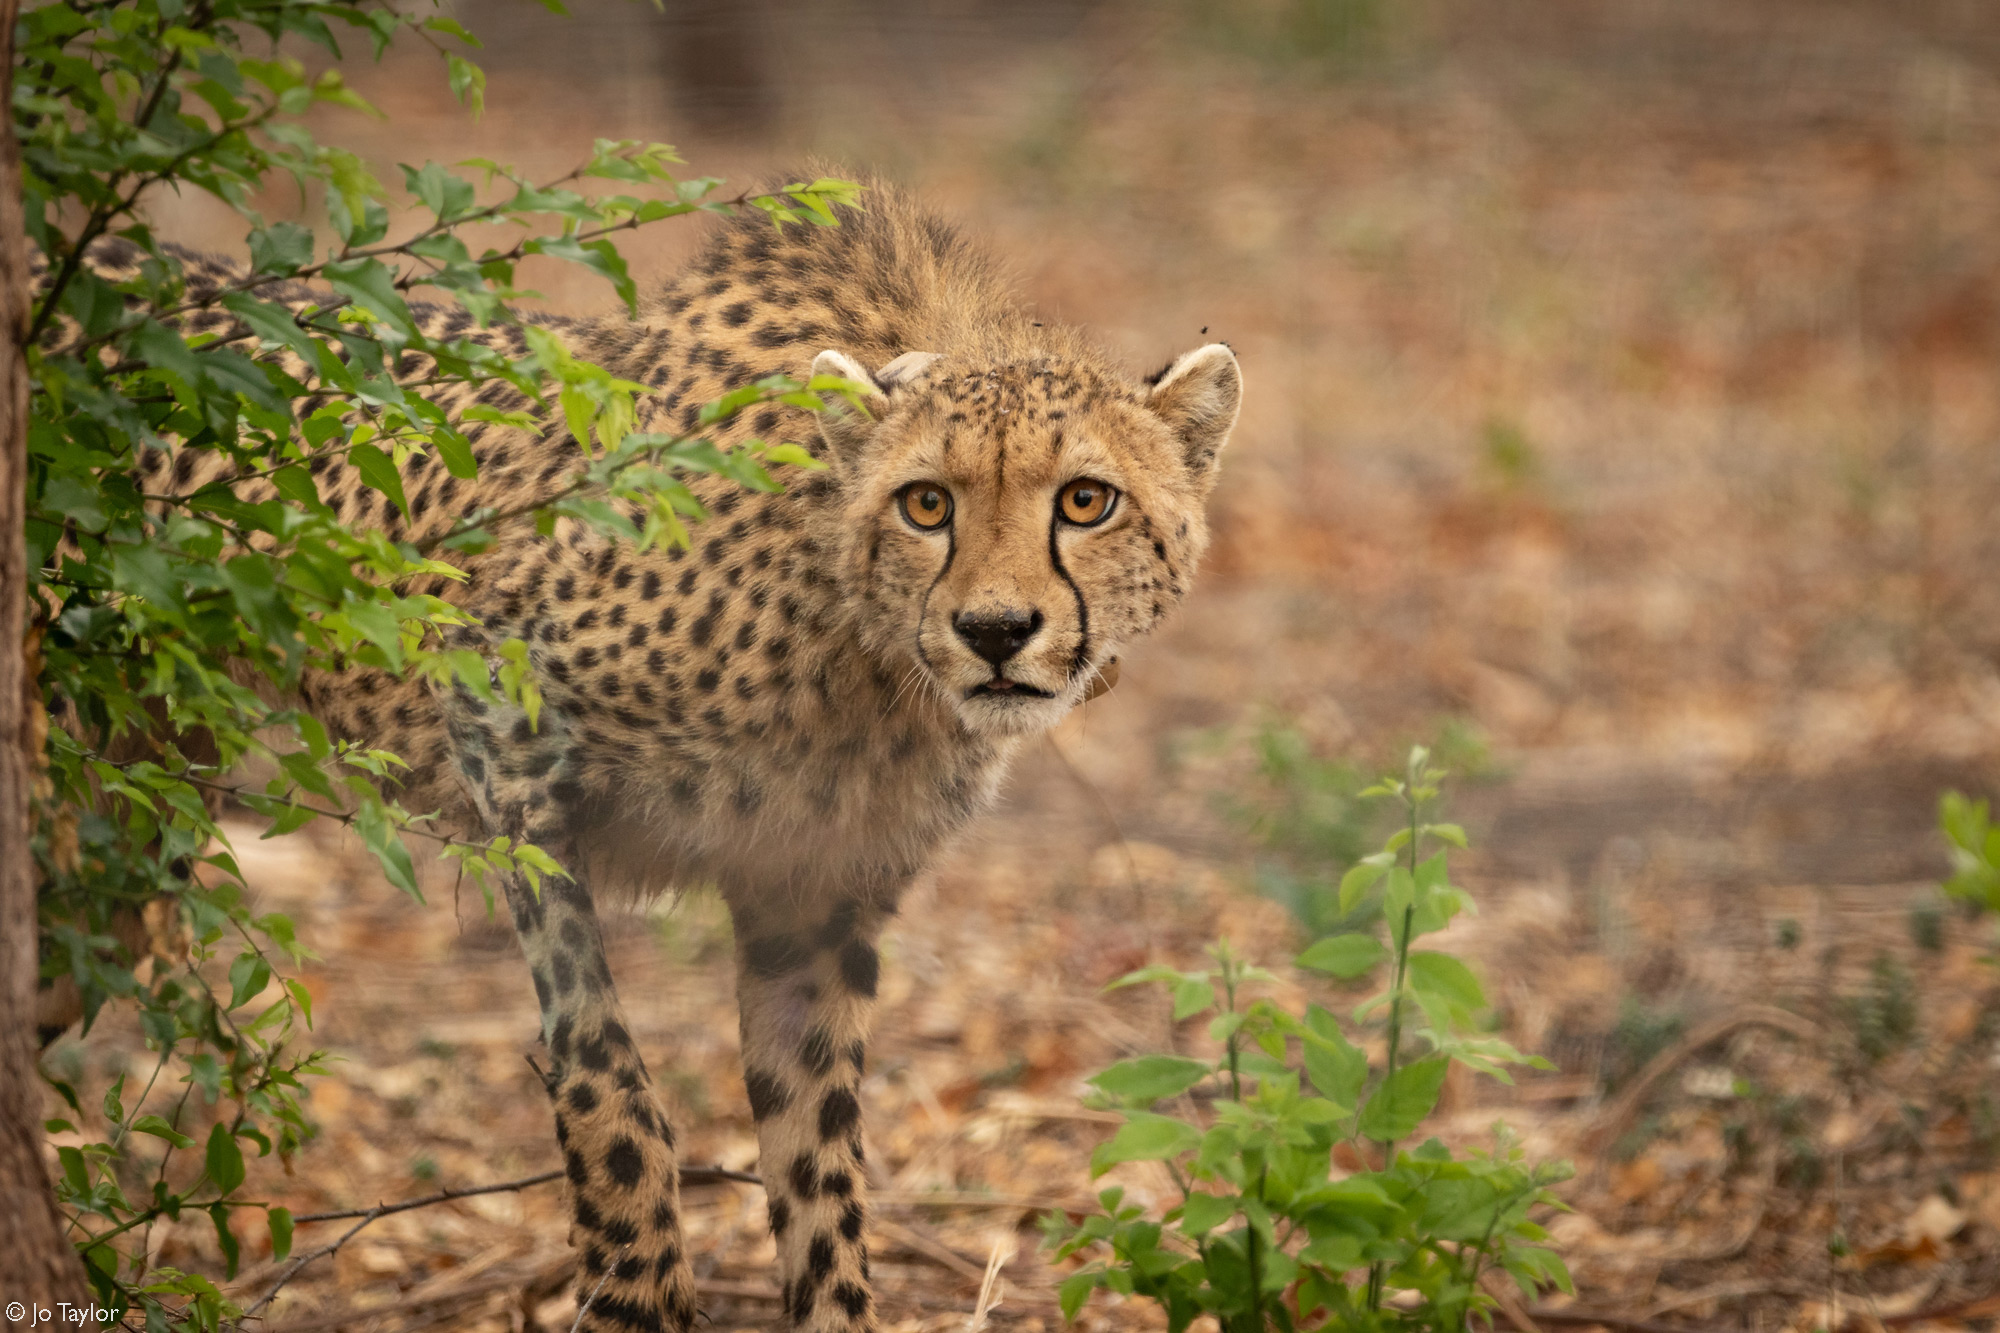 The female cheetah that we drove for over 55 hours cautiously explores her new home © Jo Taylor